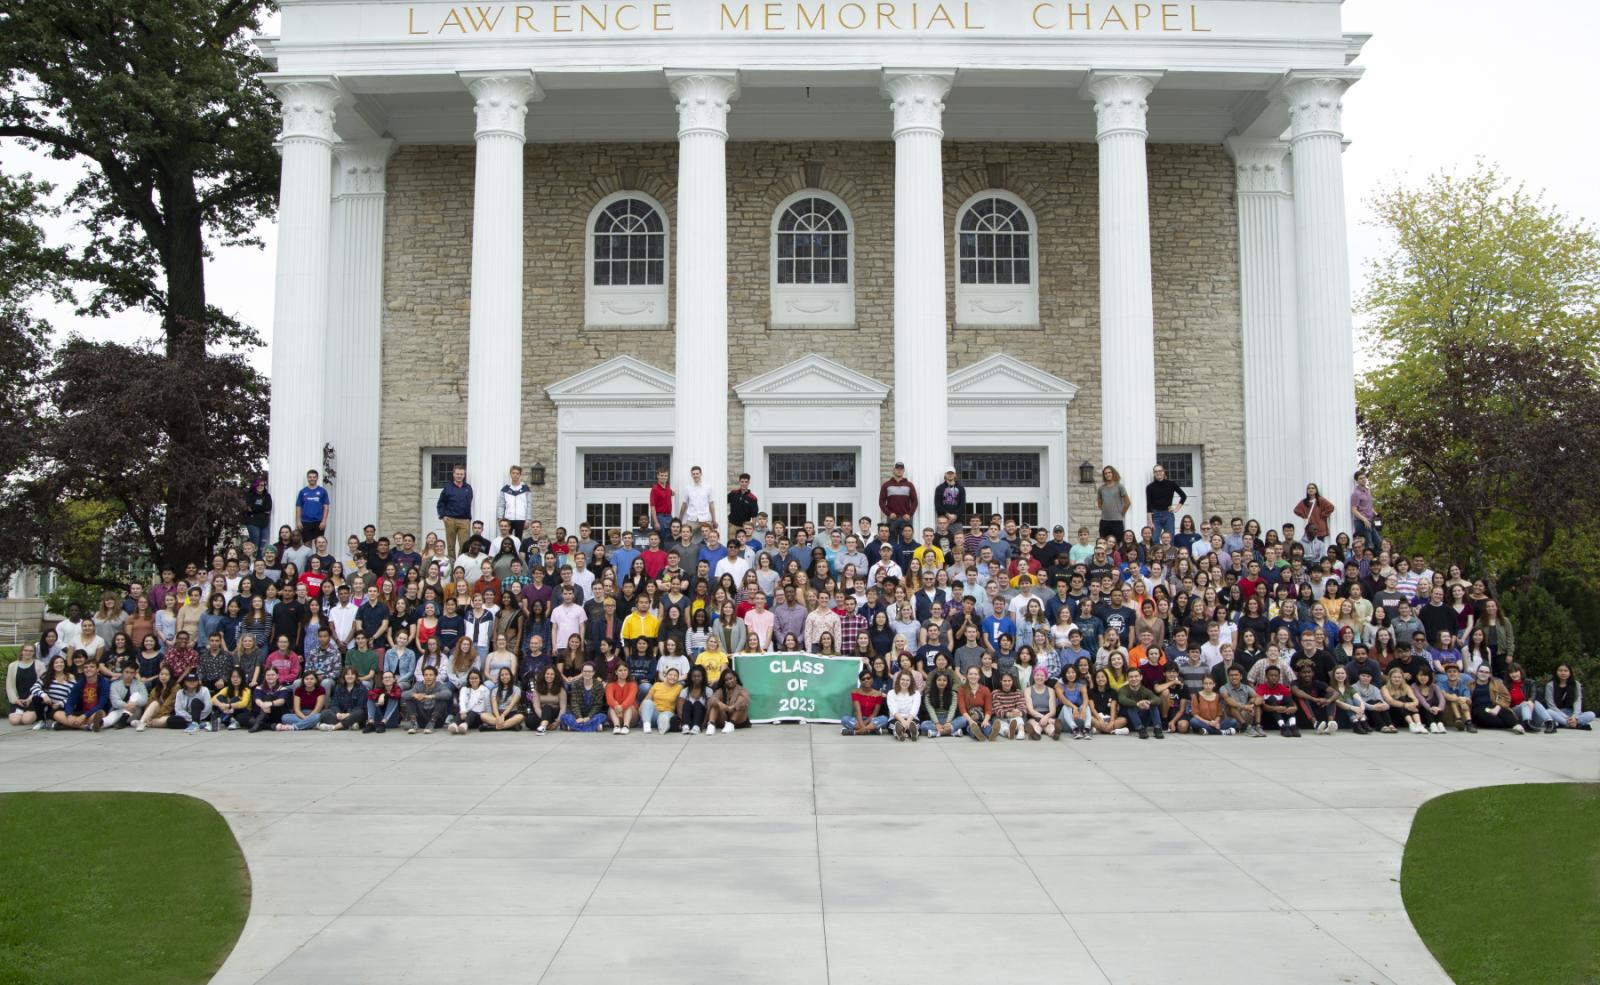 Class of 2023 poses for a class photo in front of Memorial Chapel during Welcome Week in September 2019.